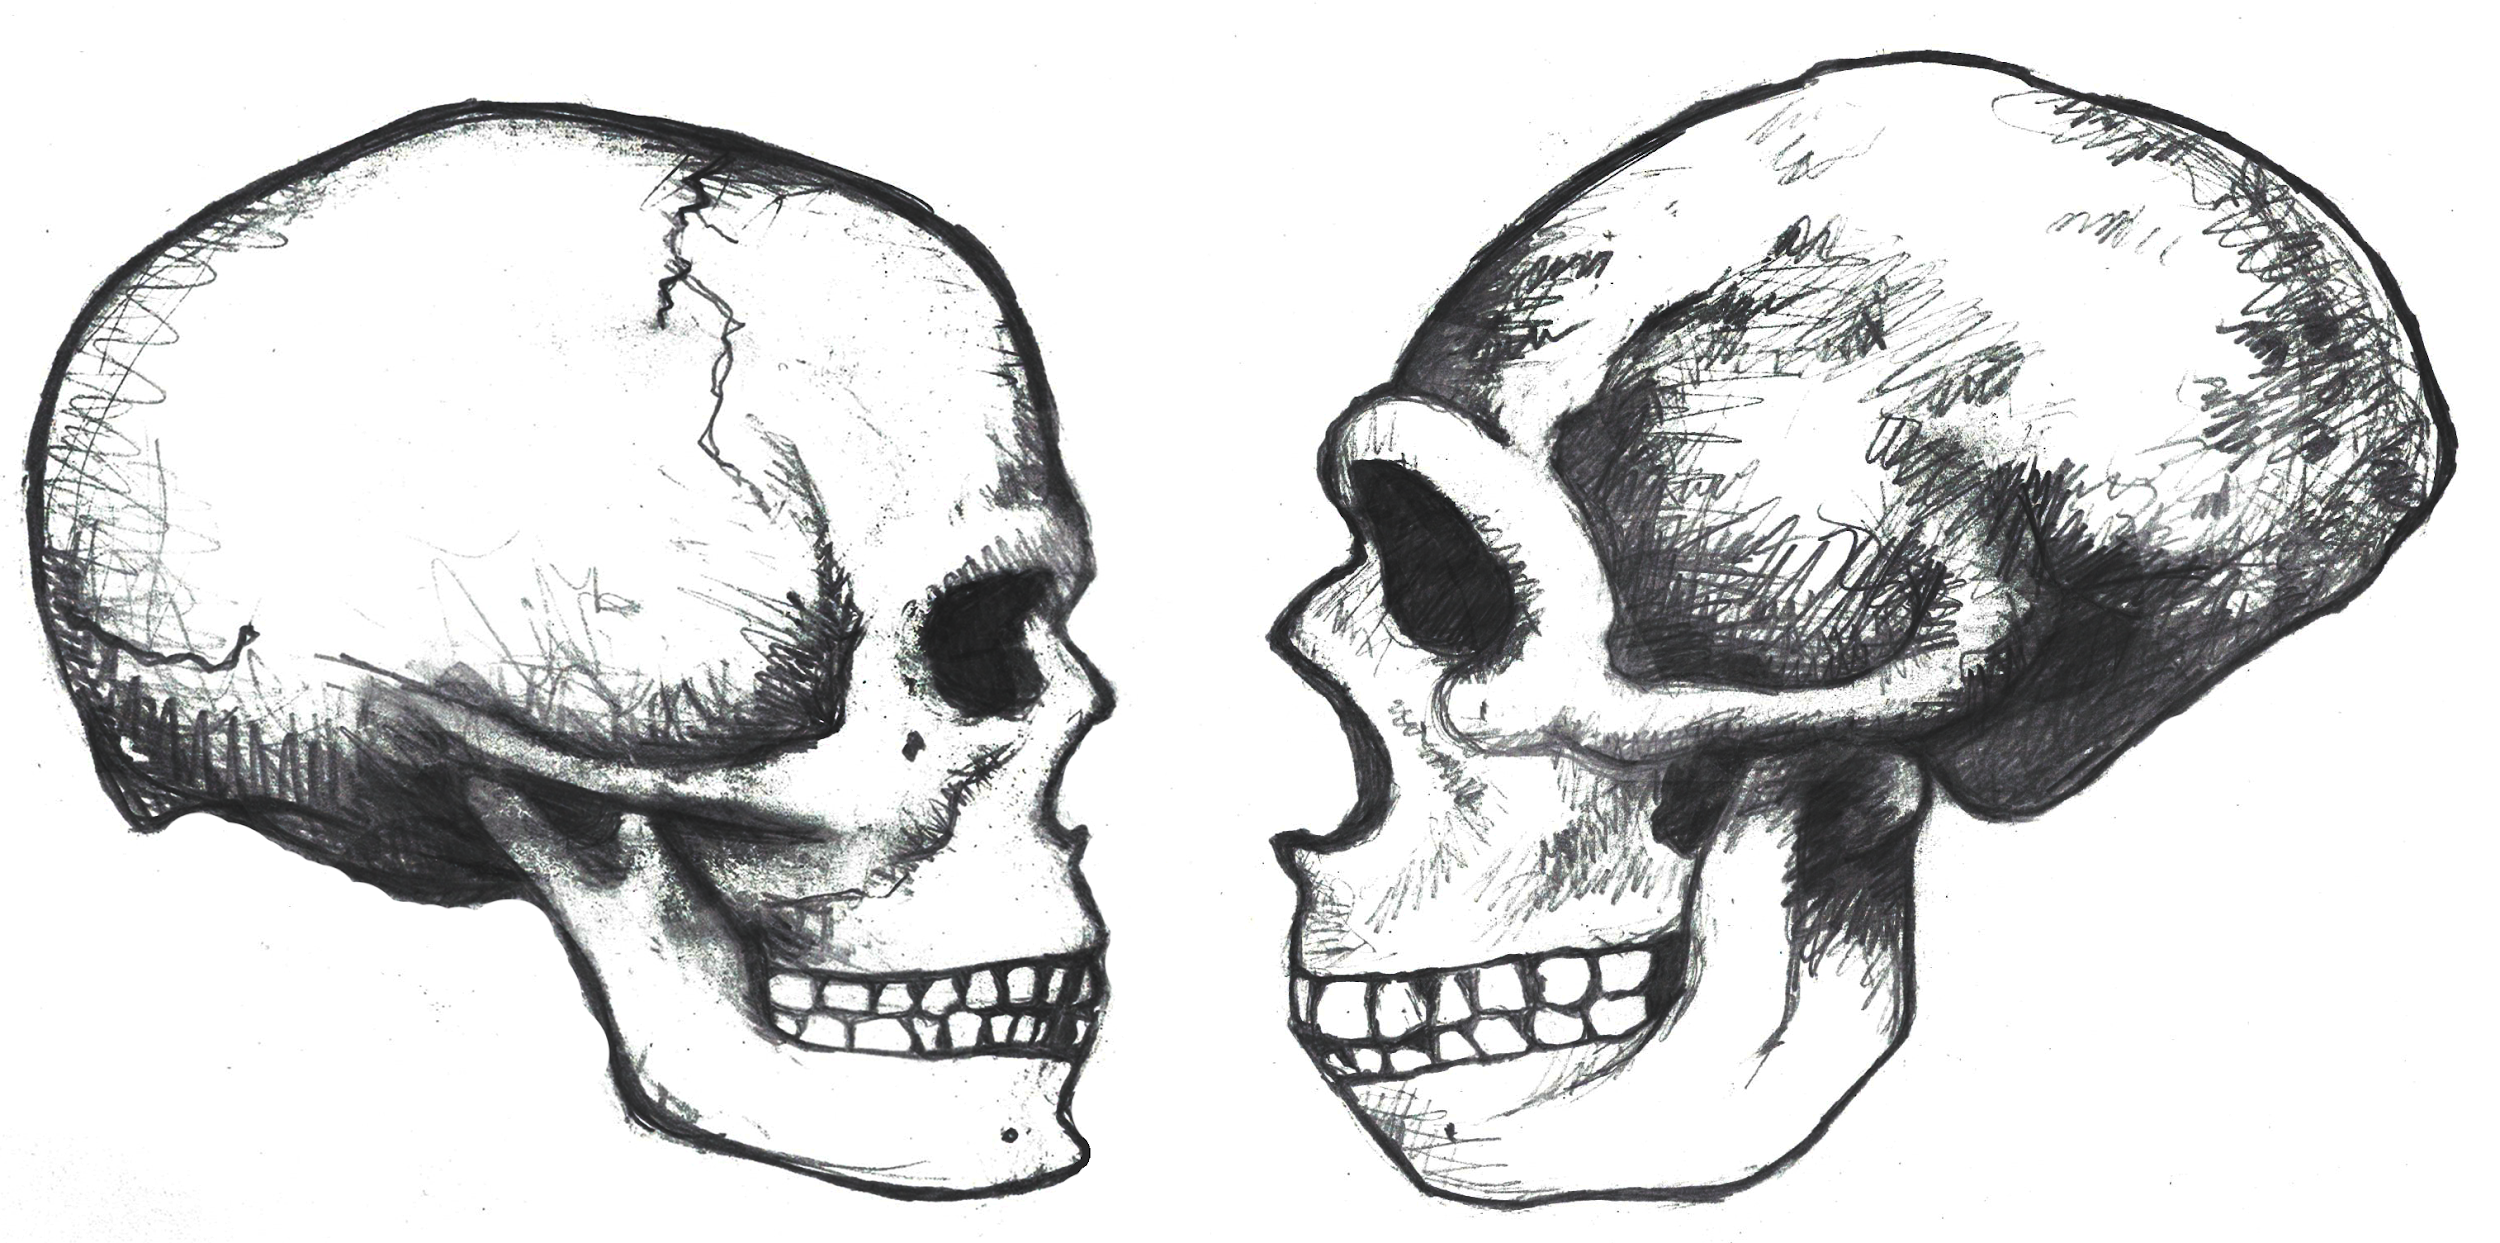 Comparison between modern (left) and archaic (right) Homo sapiens skulls. Note the overall gracility of the modern skull, as well as the globular braincase.